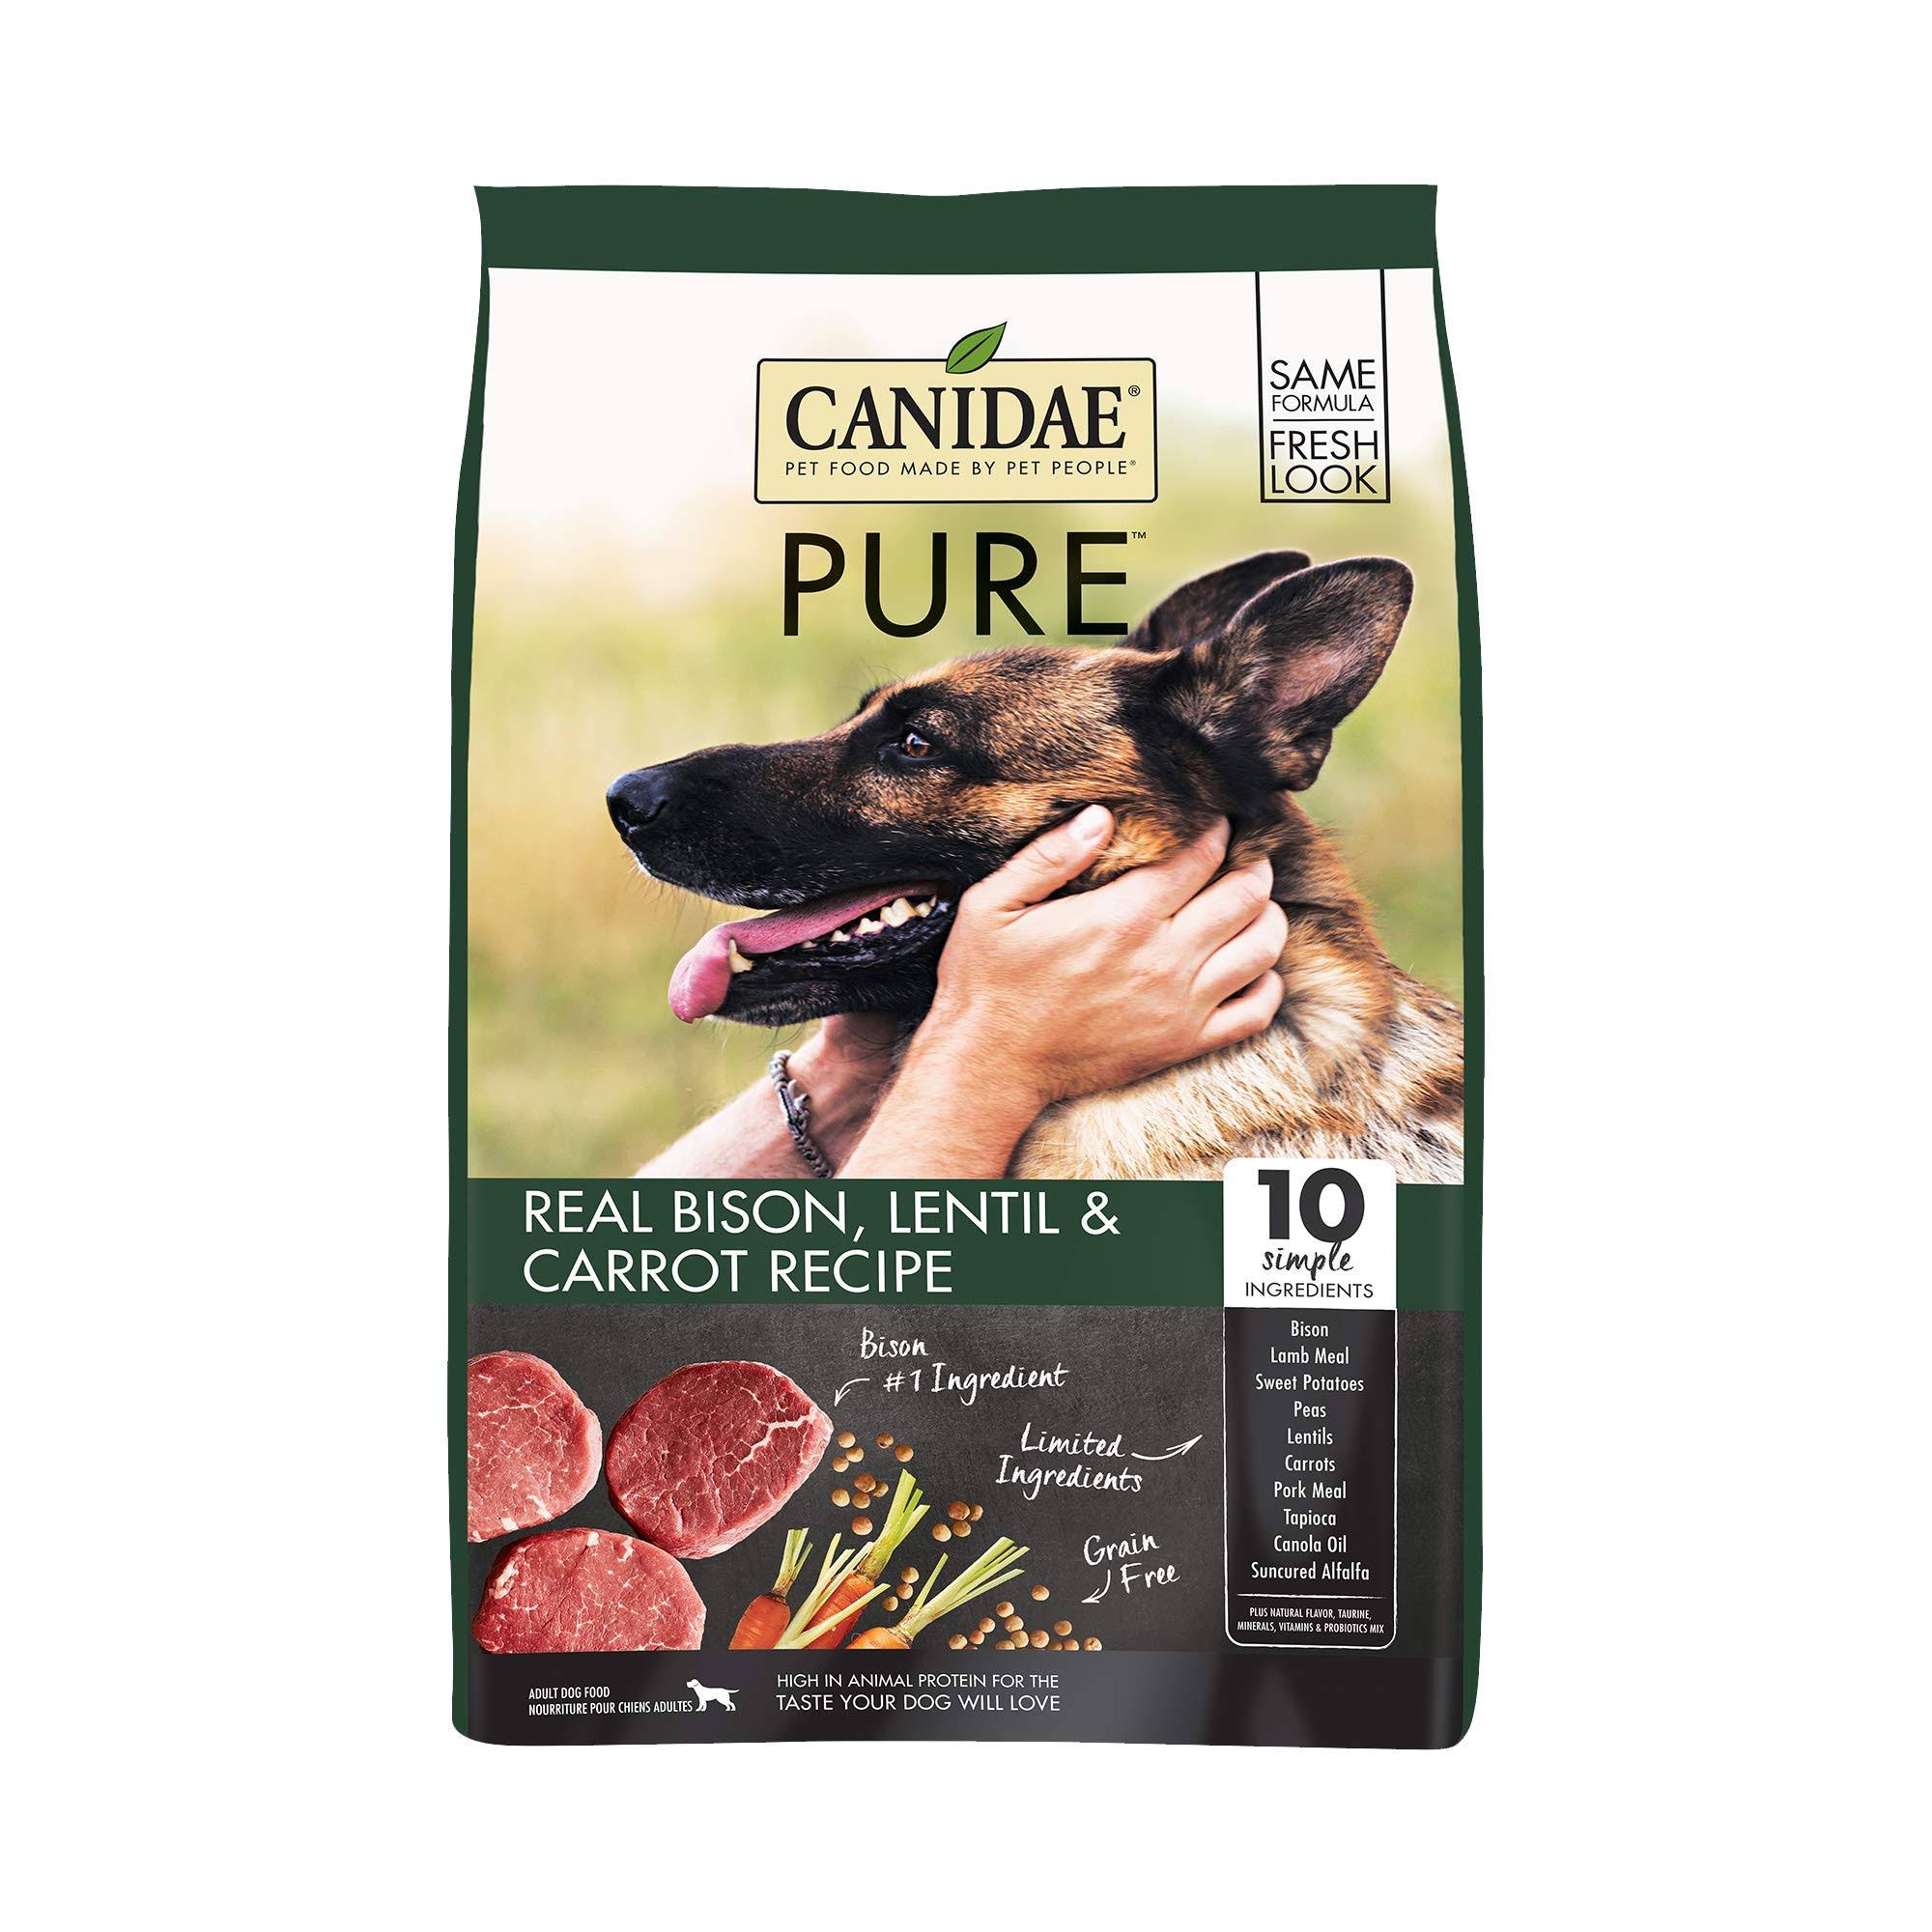 Canidae Grain Free Pure Bison Lentil Carrot Dry Dog Food, 21 lb